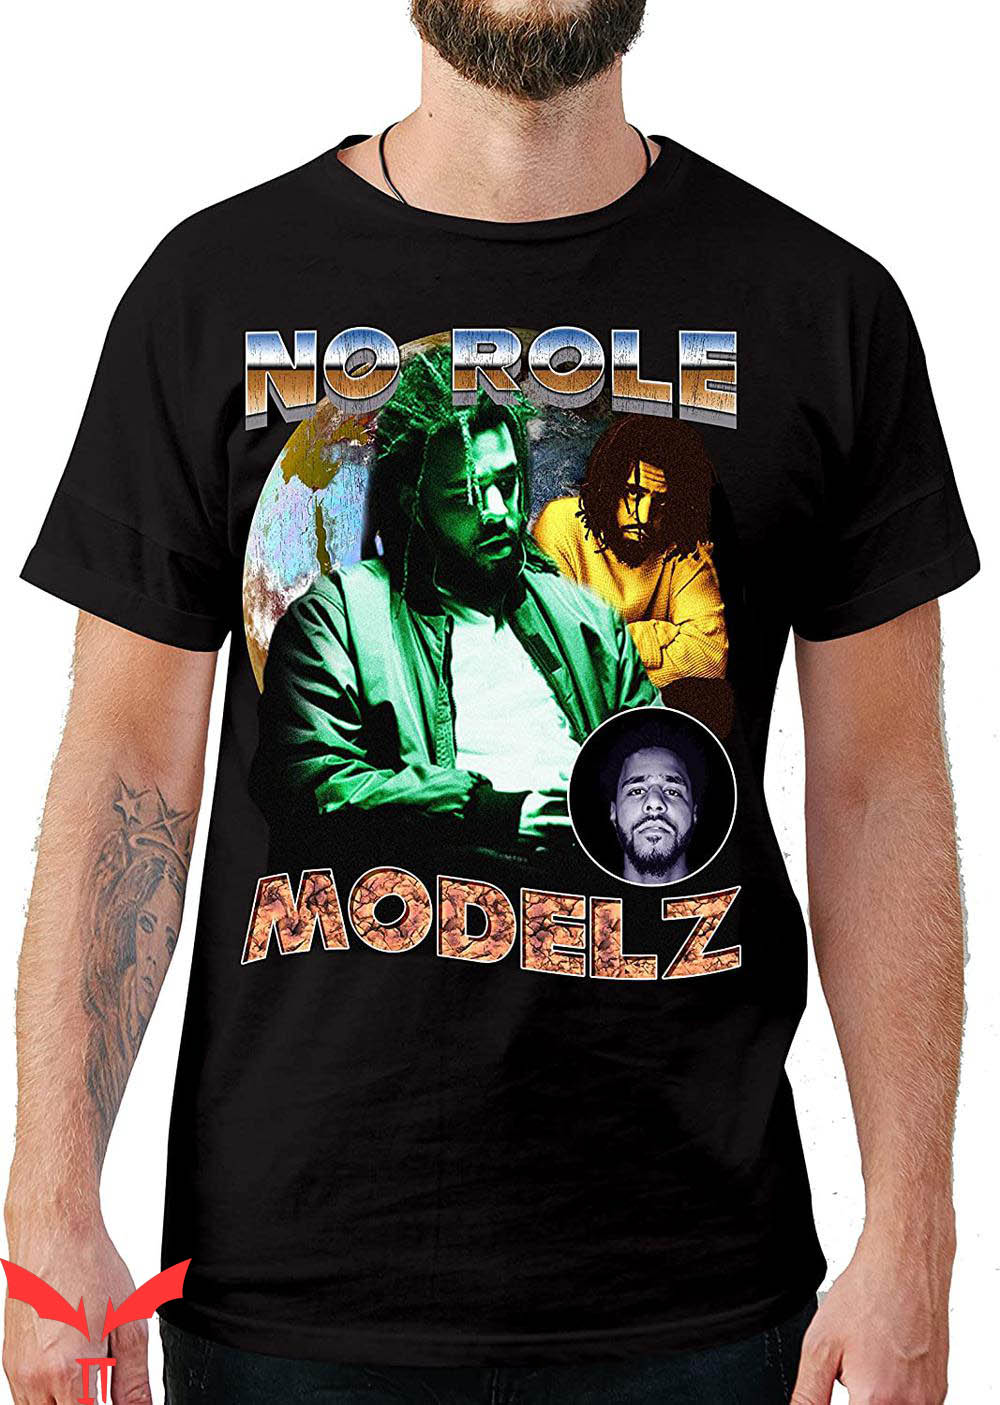 Vintage Ice Cube T-Shirt Old School Hip Hop Rappers T-Shirts